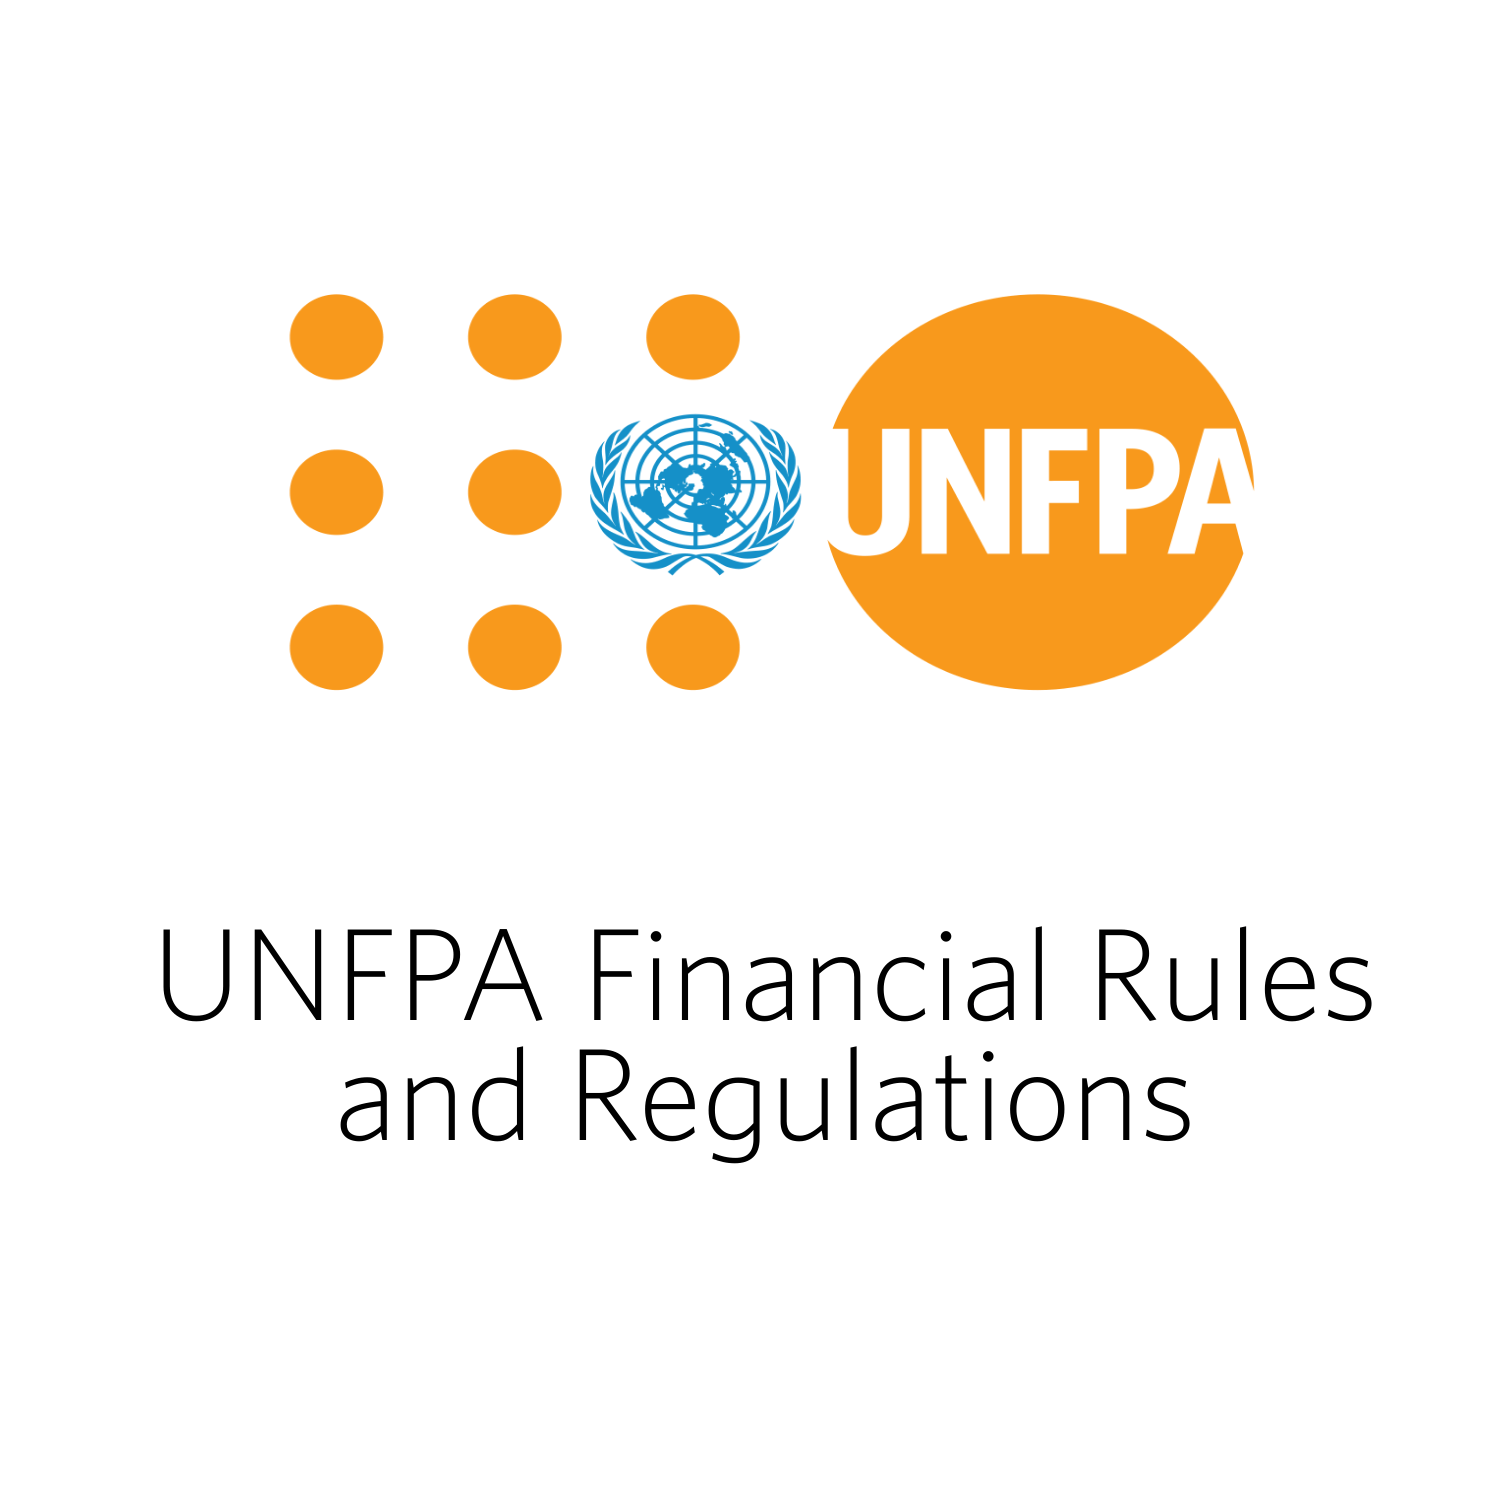 UNFPA Financial Rules and Regulations